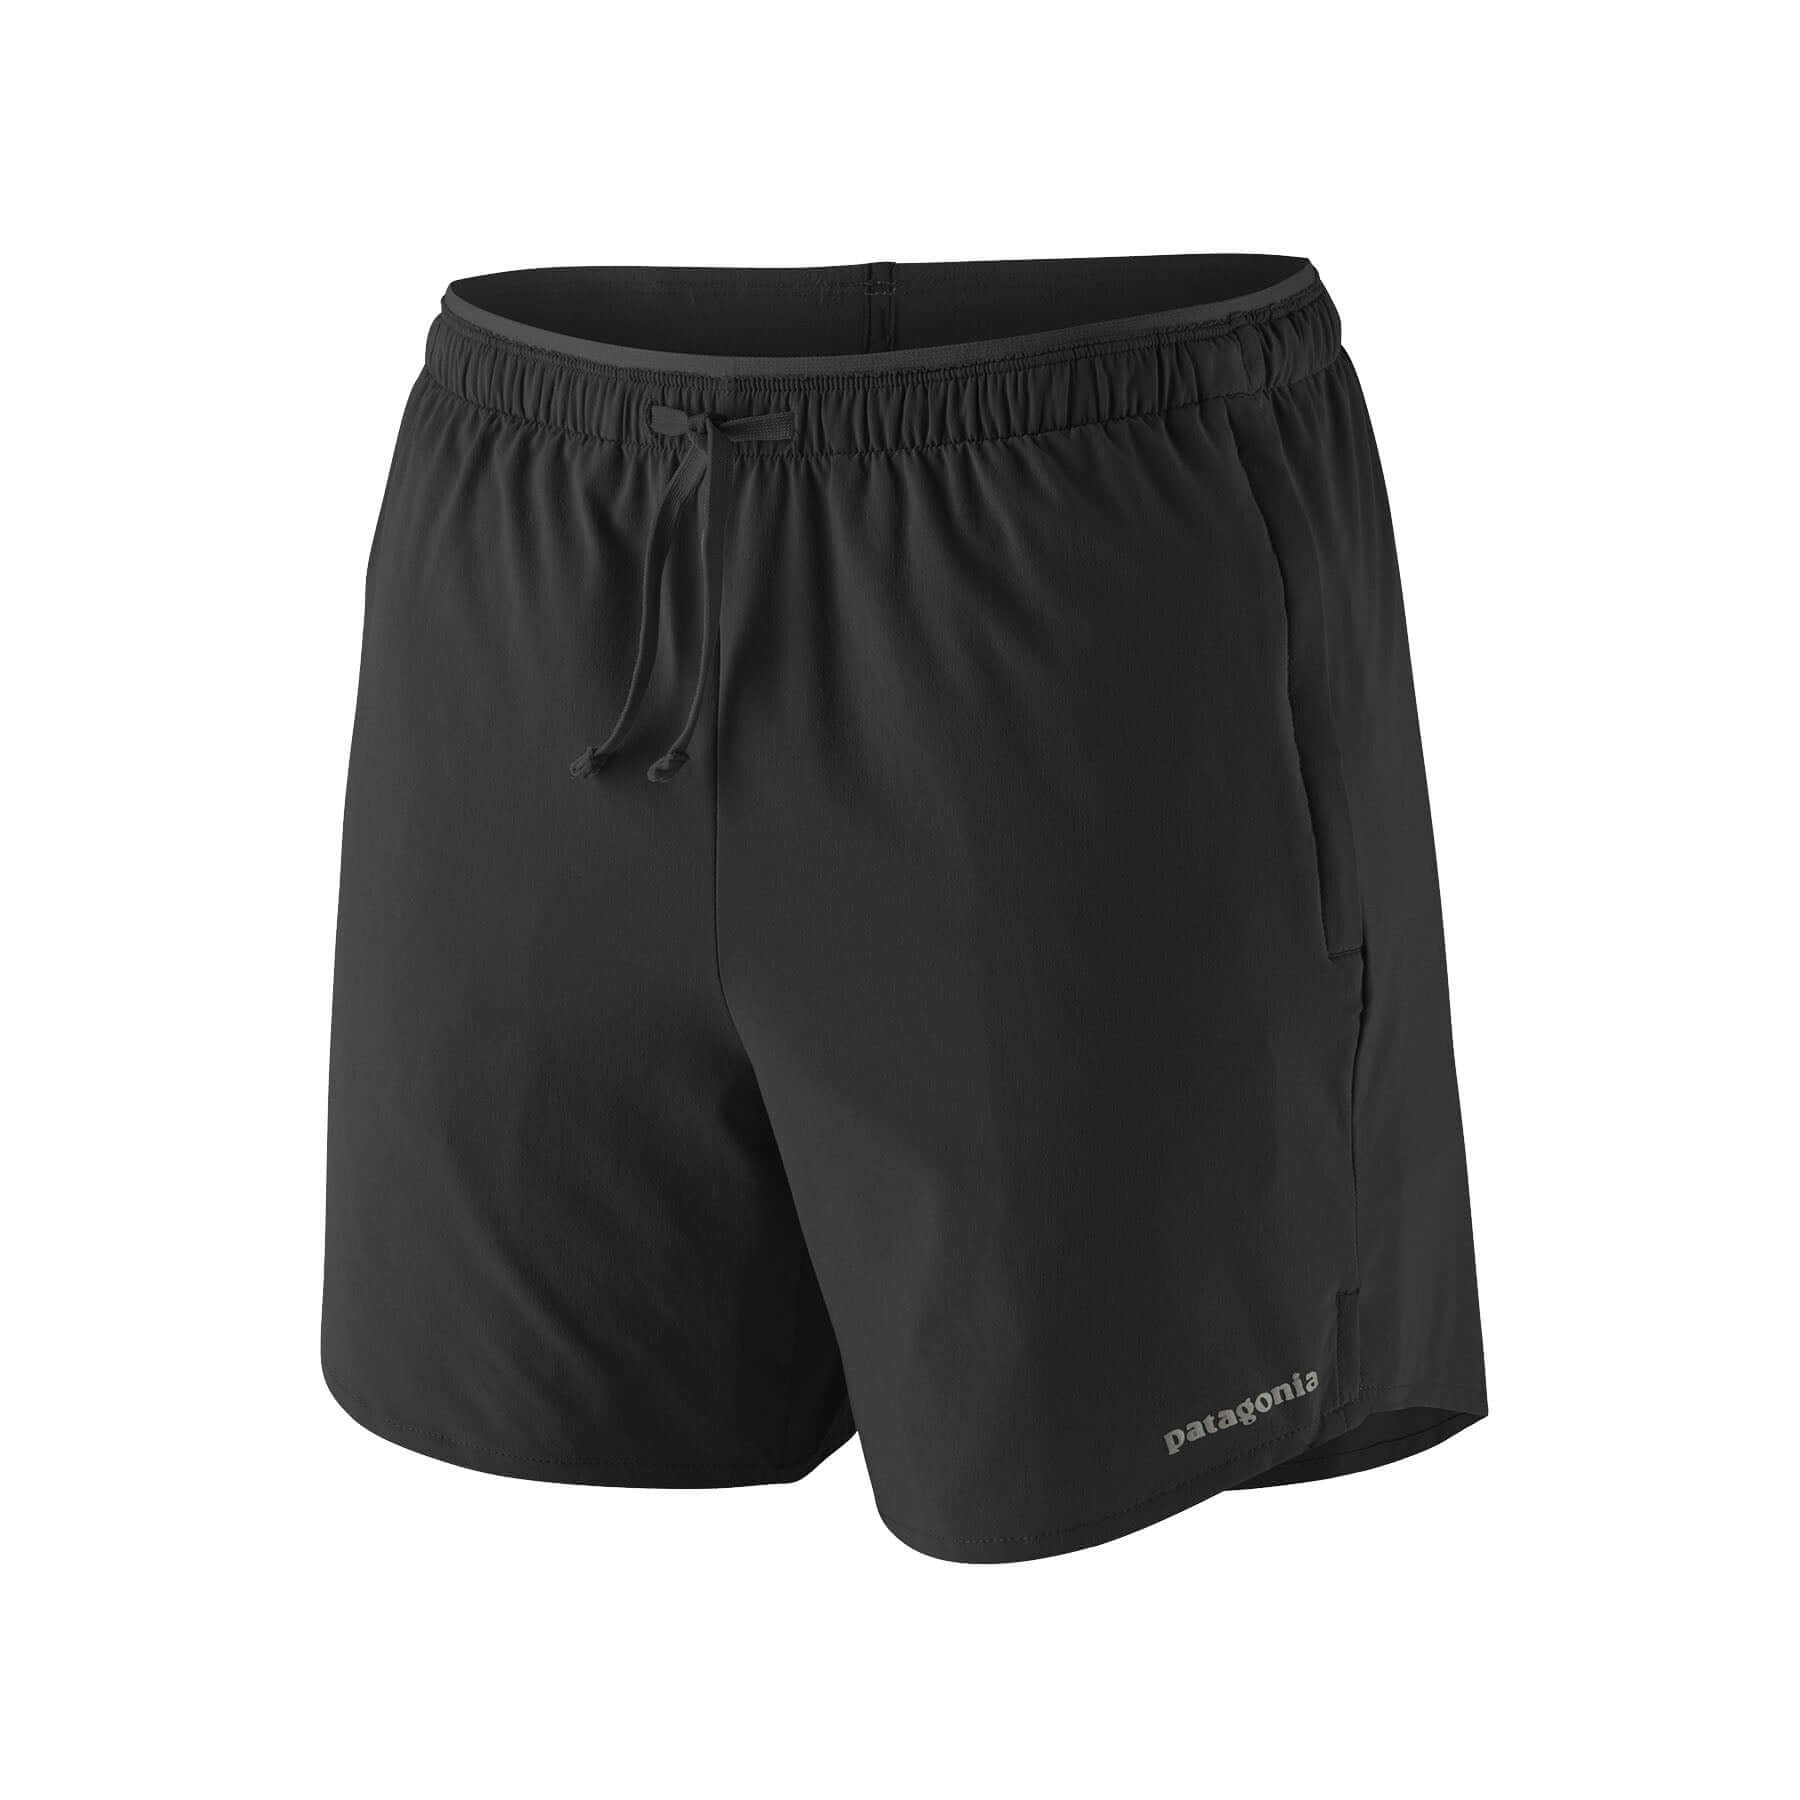 Women's Multi Trails Shorts - 5 1/2 in. in BLACK | Patagonia Bend